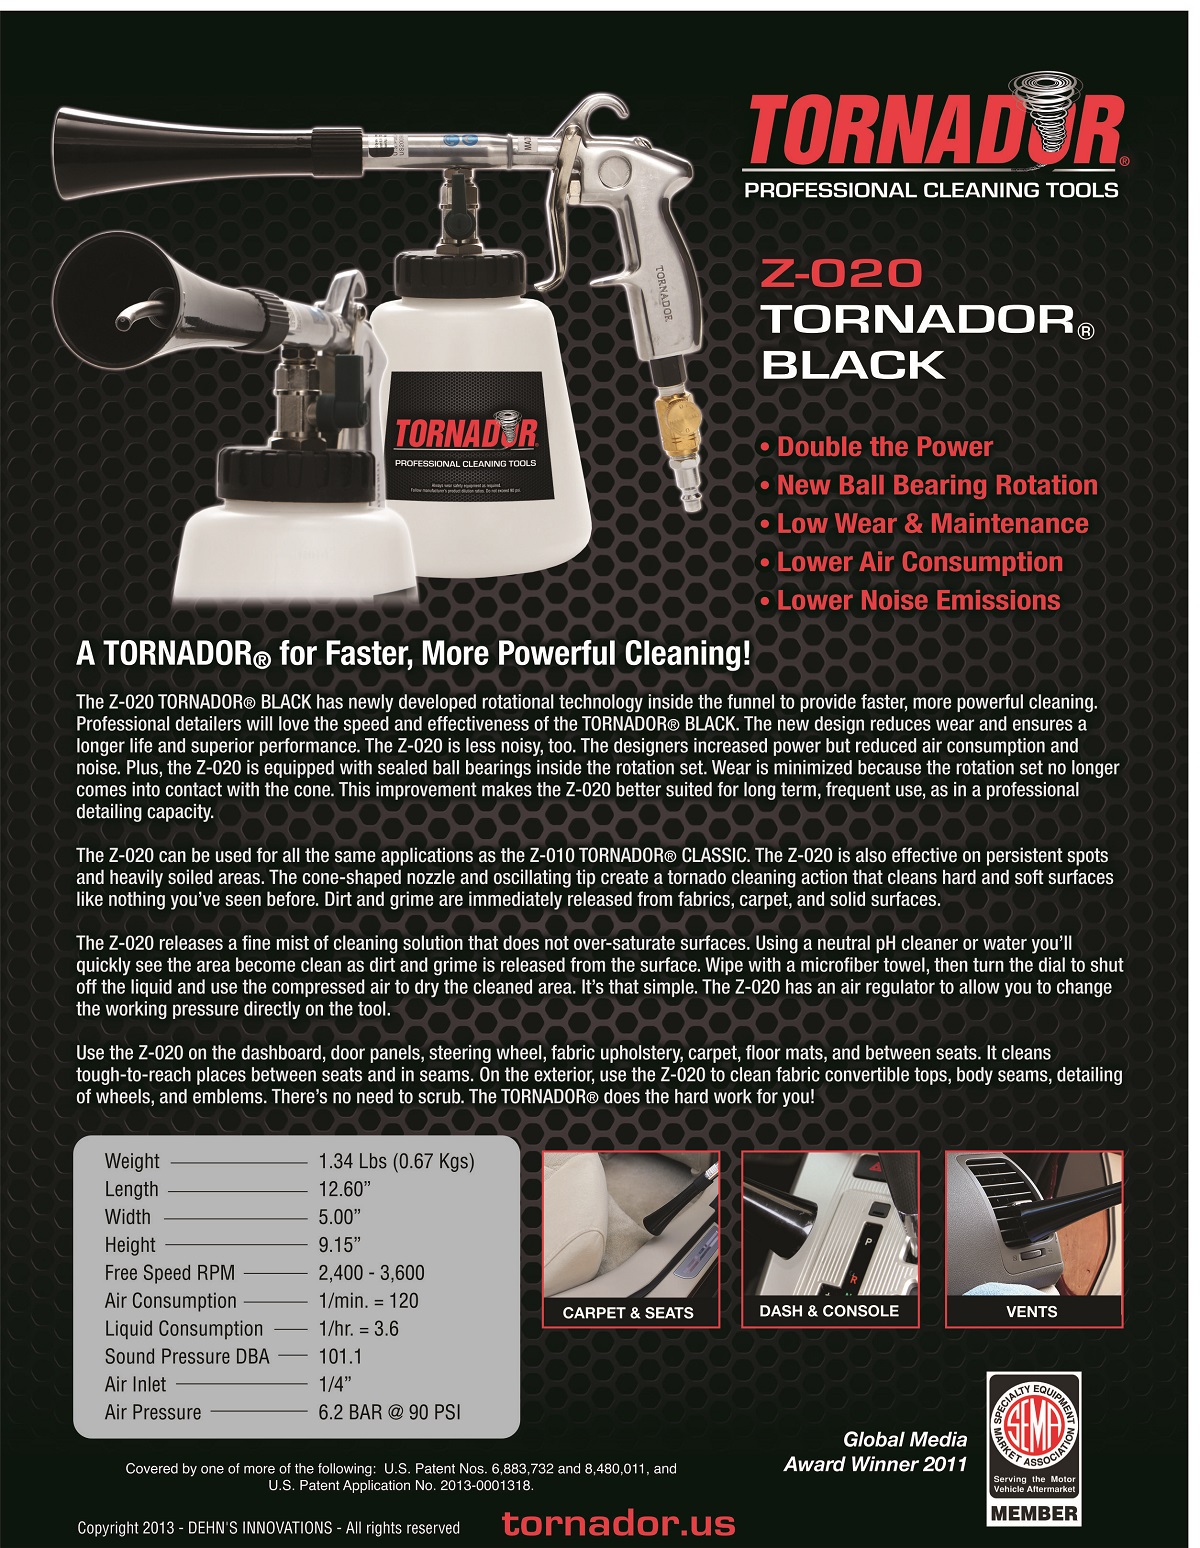 Tornador Car Cleaner Manufacturers and Suppliers, Mainly offer tornador  cleaner,tornado black cleaner,car cleaner